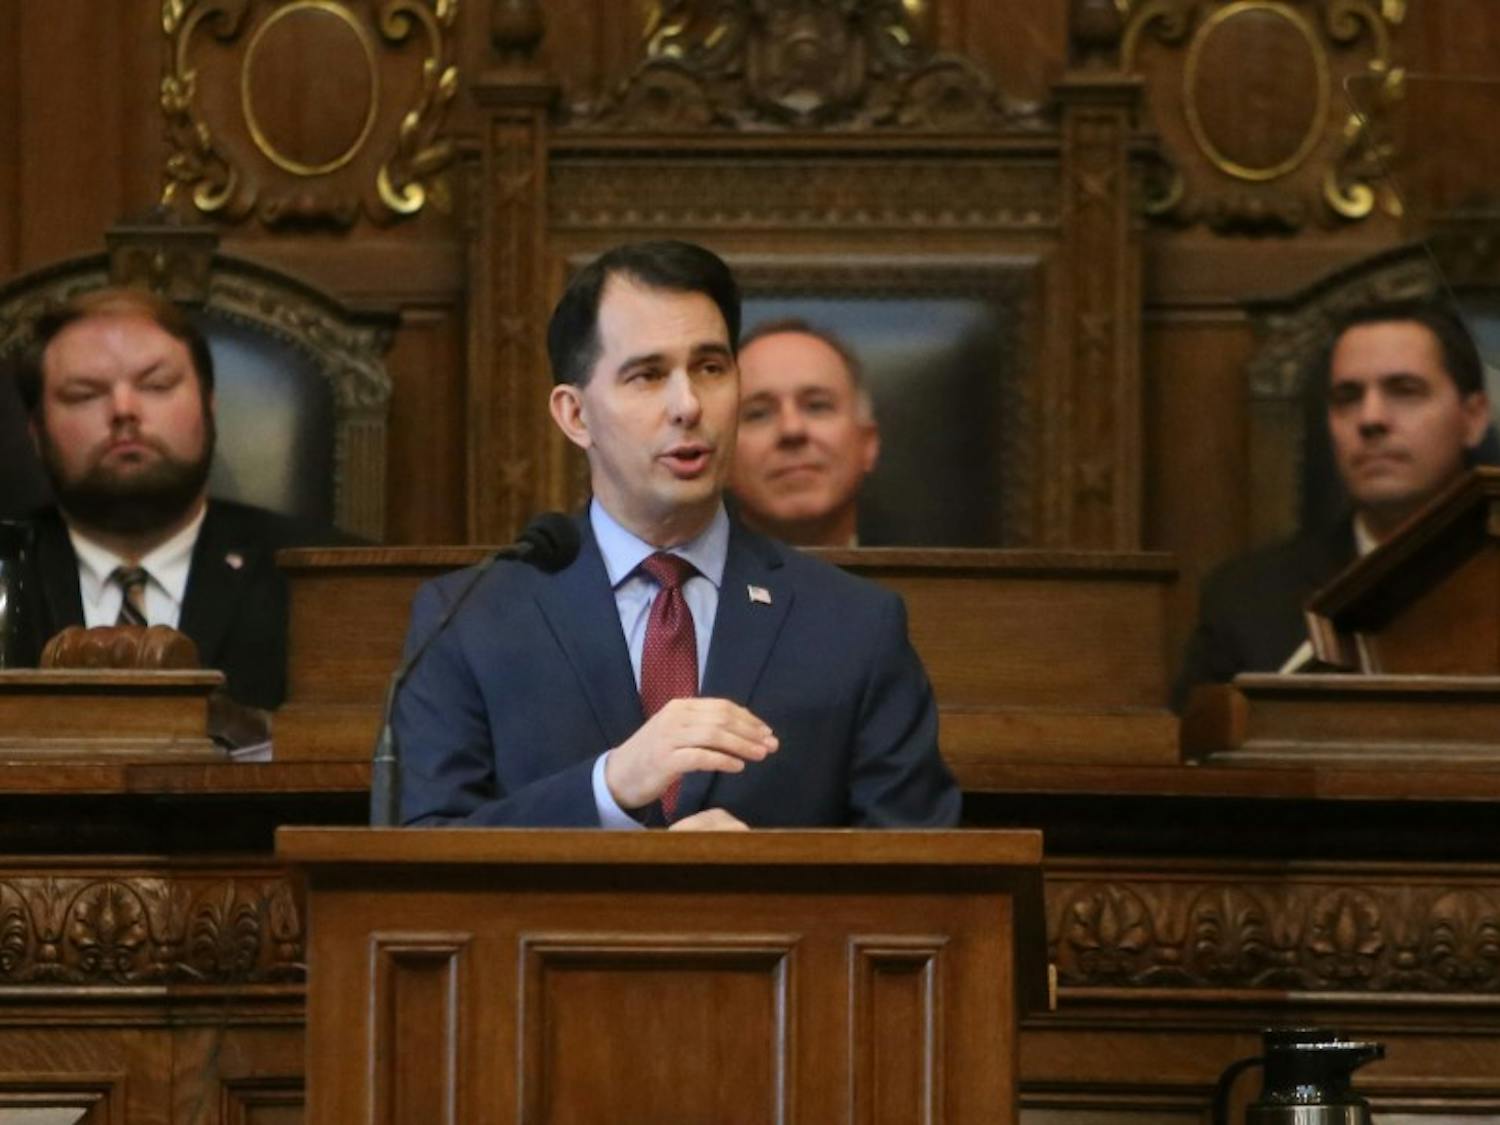 Gov. Scott Walker signed Act 10 into law in 2011.